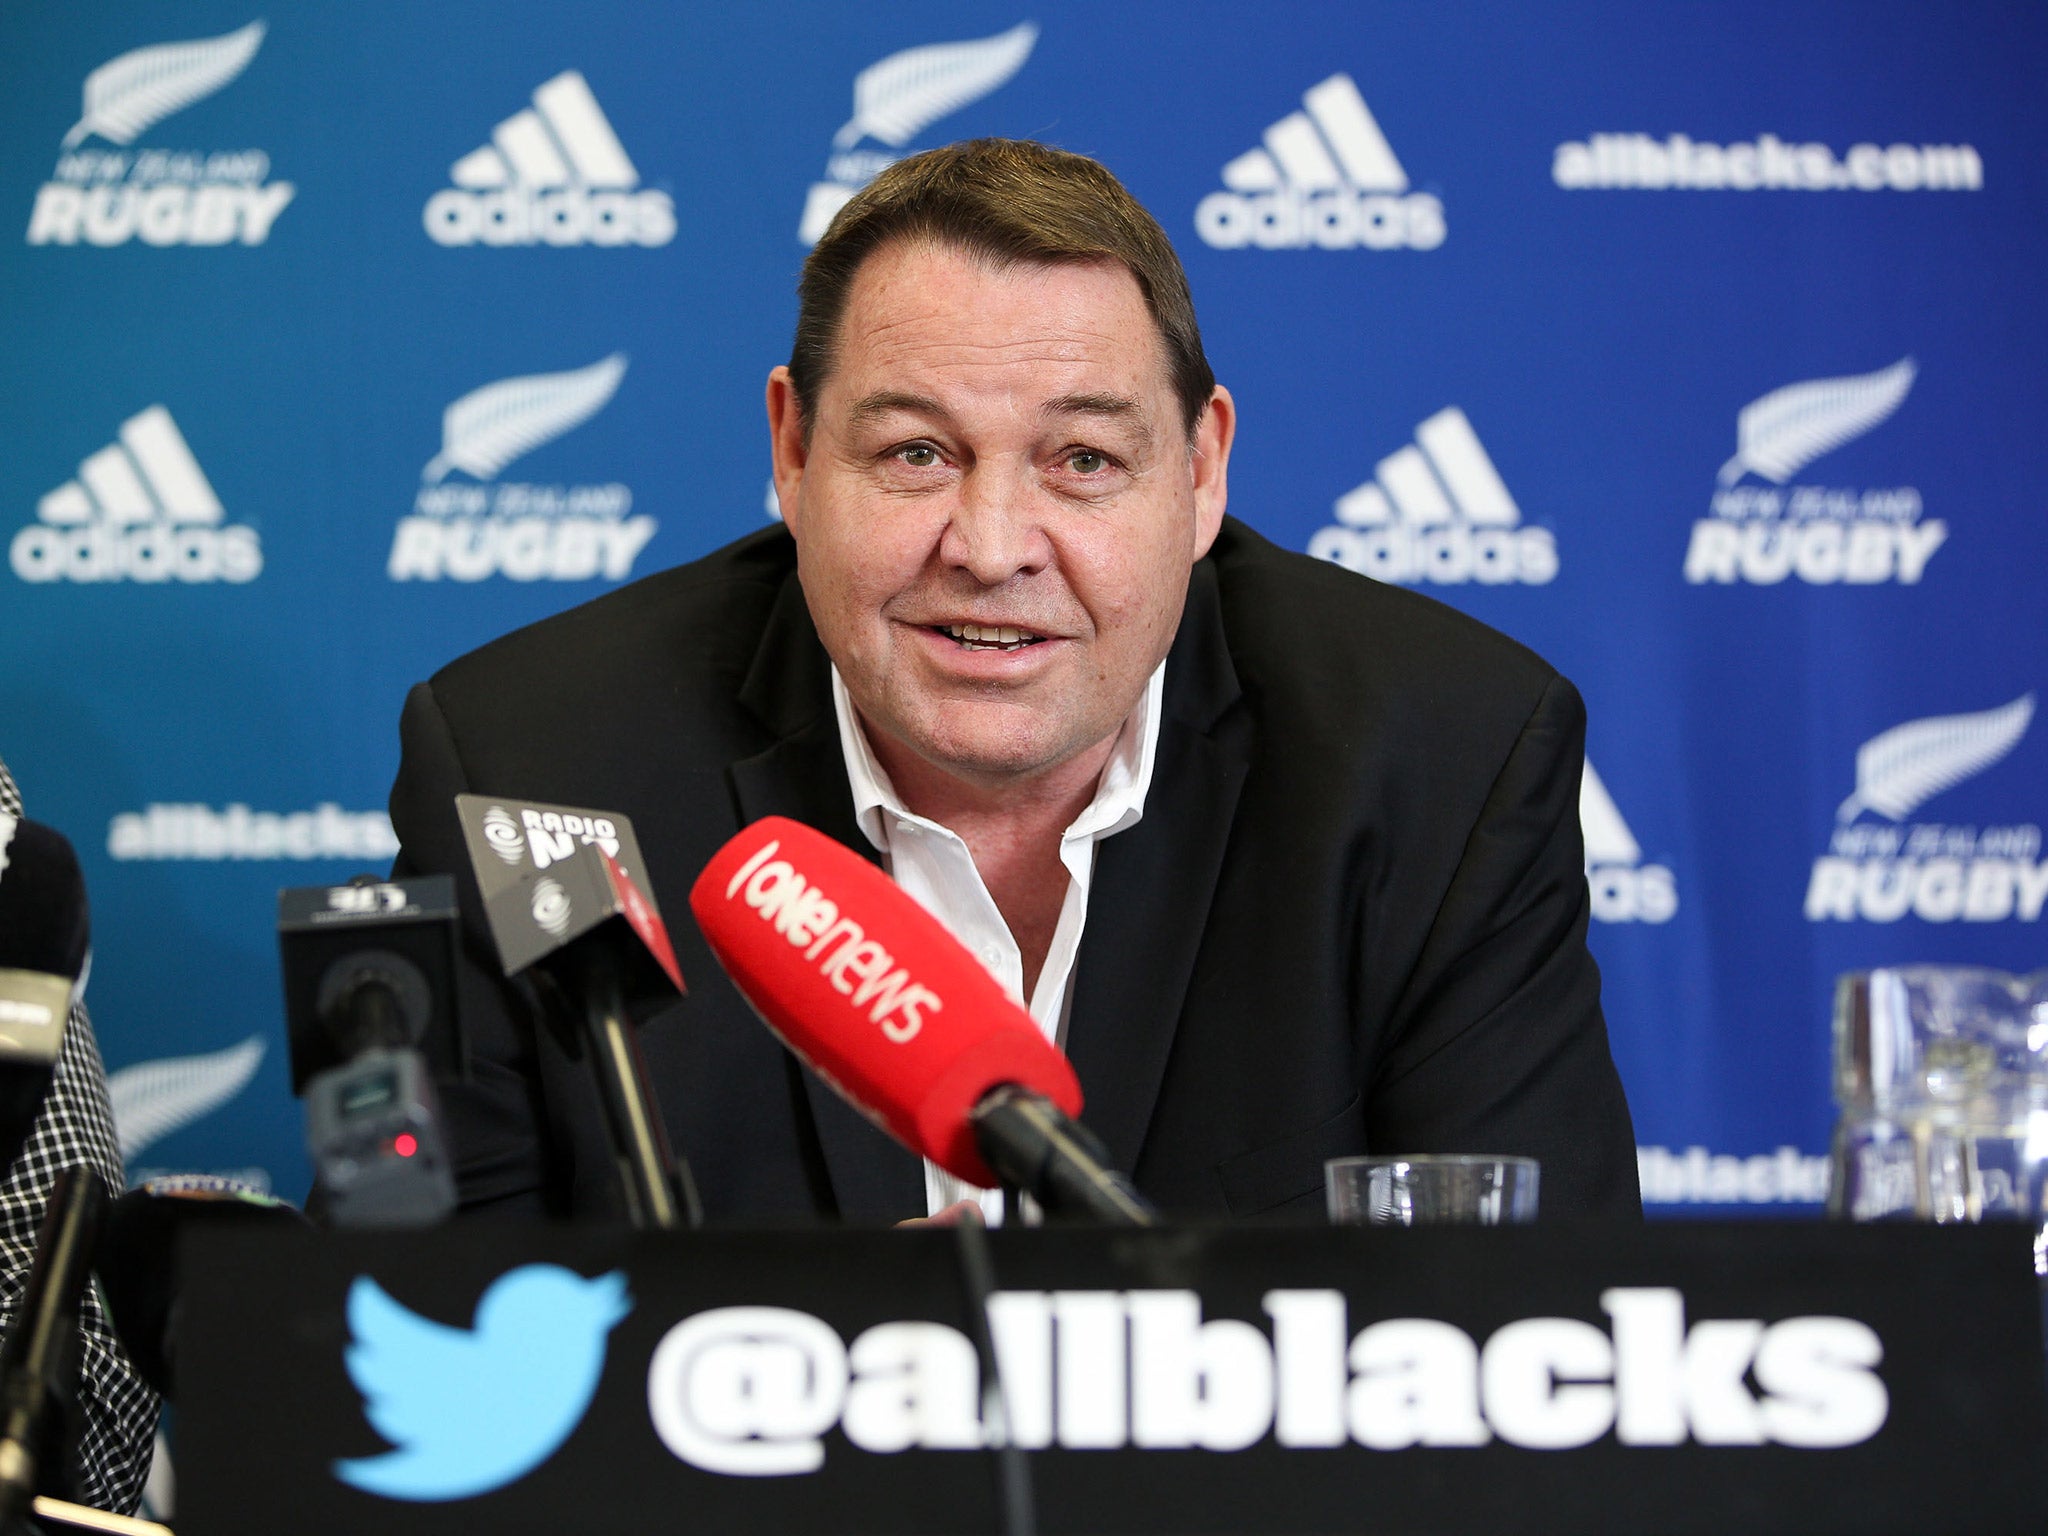 Steve Hansen has signed a new deal to remain New Zealand coach until 2019